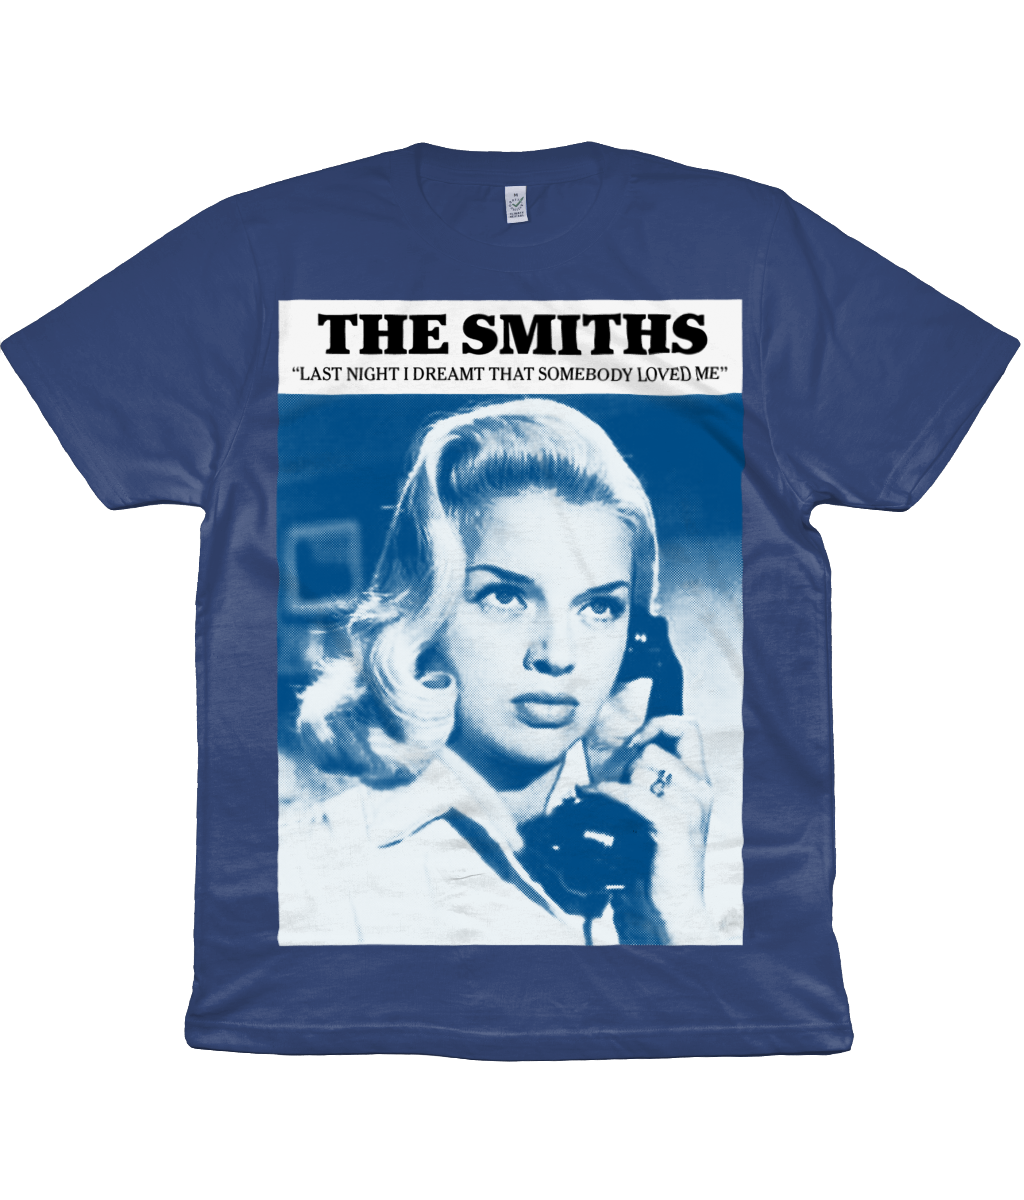 The Smiths - Last Night I Dreamt That Somebody Loved Me - Diana Dors - Denim Blue